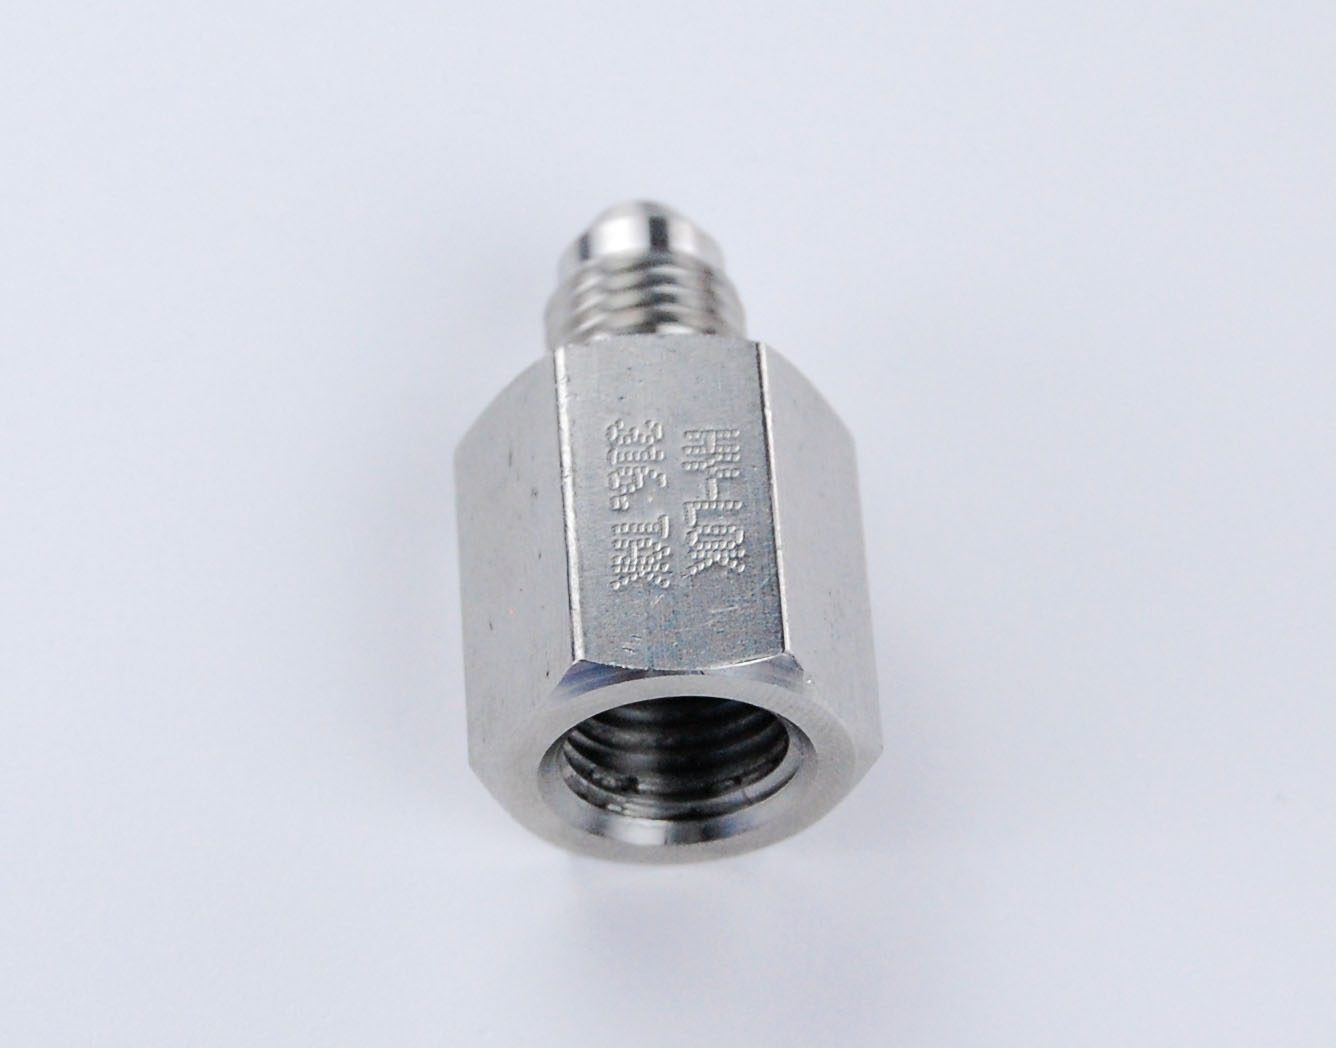 Adapter, #4 JIC Male to 1/4 NPT Female, Stainless Steel #67190SS